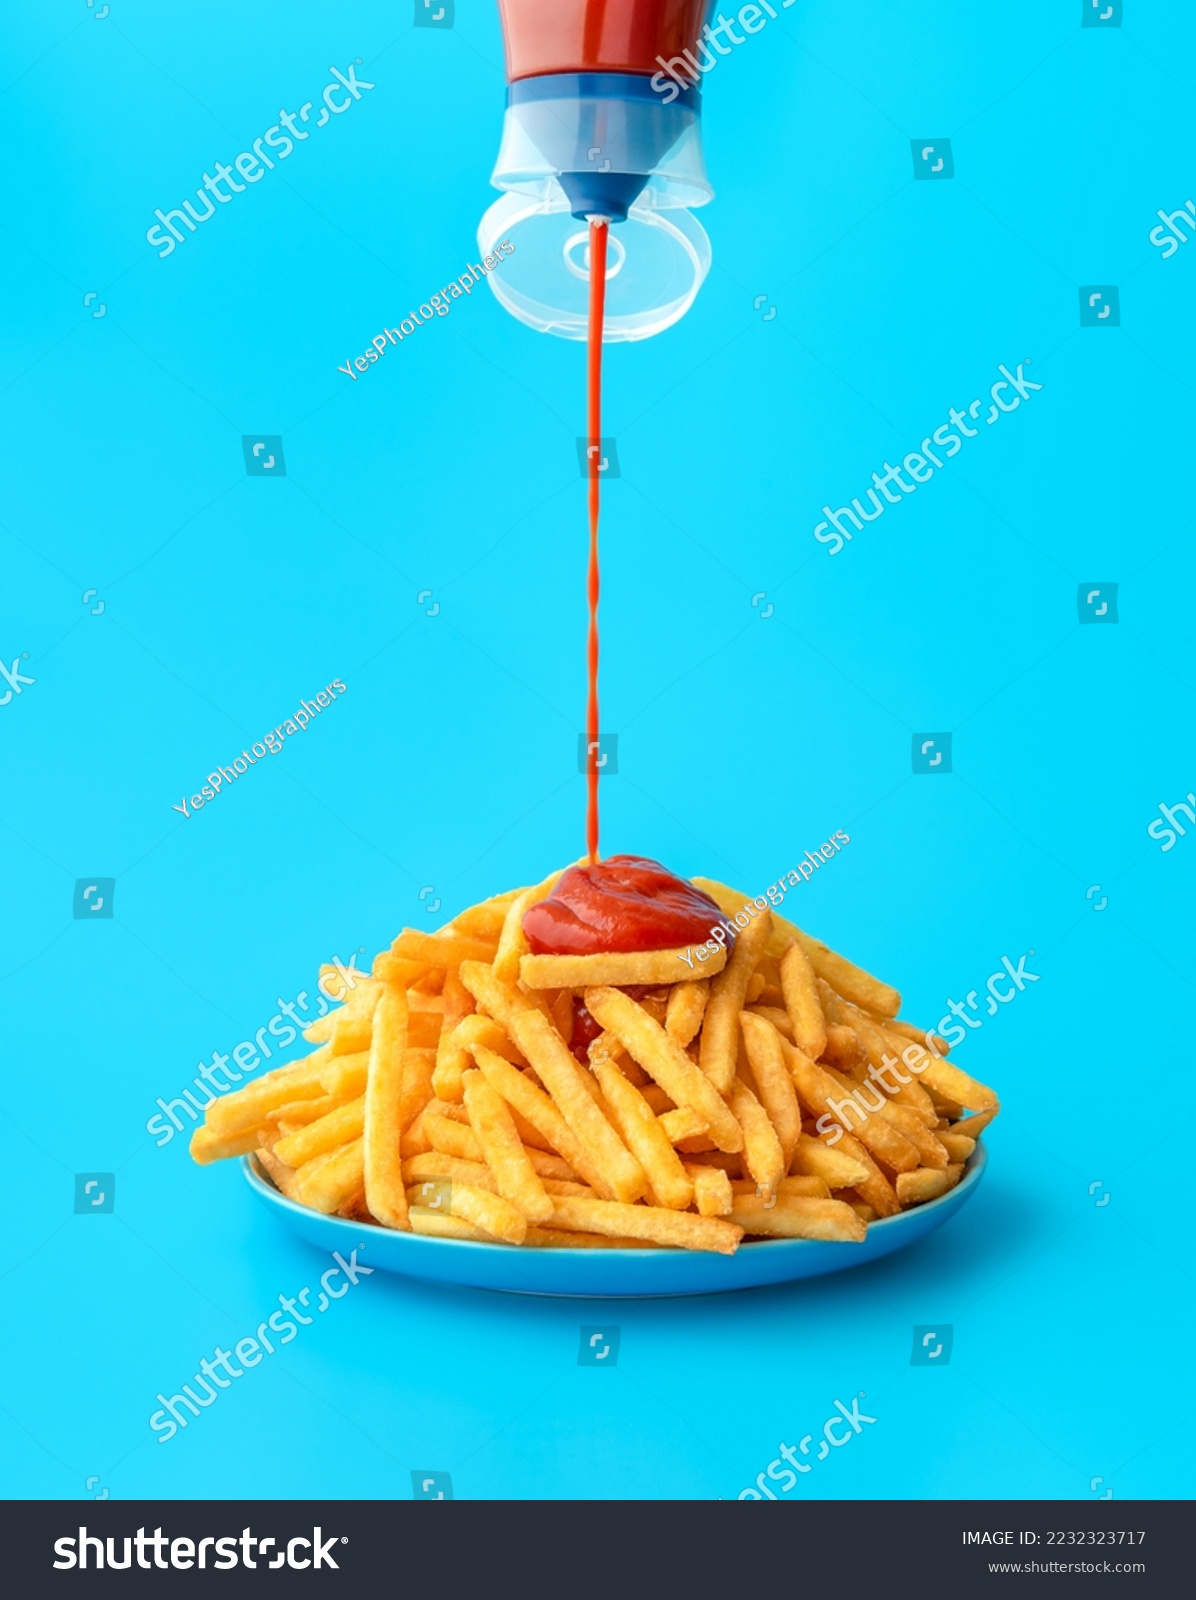 Pouring ketchup from a bottle over french fries, minimalist on a blue background. Delicious meal, french fries with ketchup in bright light on a colorful table. #2232323717